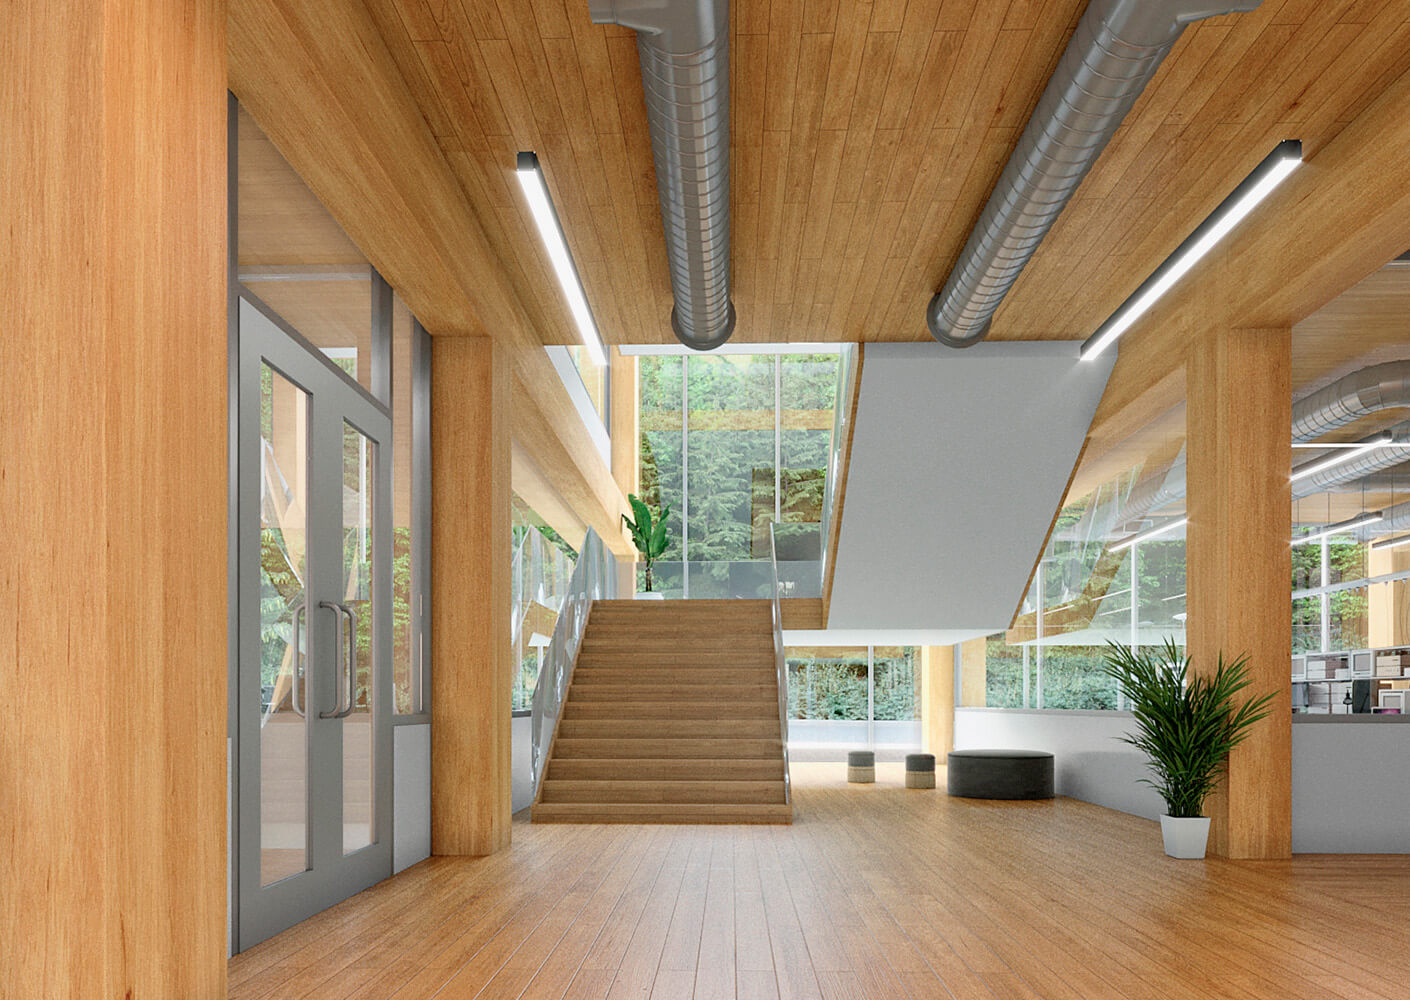 A modern room, covered in warm-toned wood, with a glass enclosed atrium and staircase on the other end.